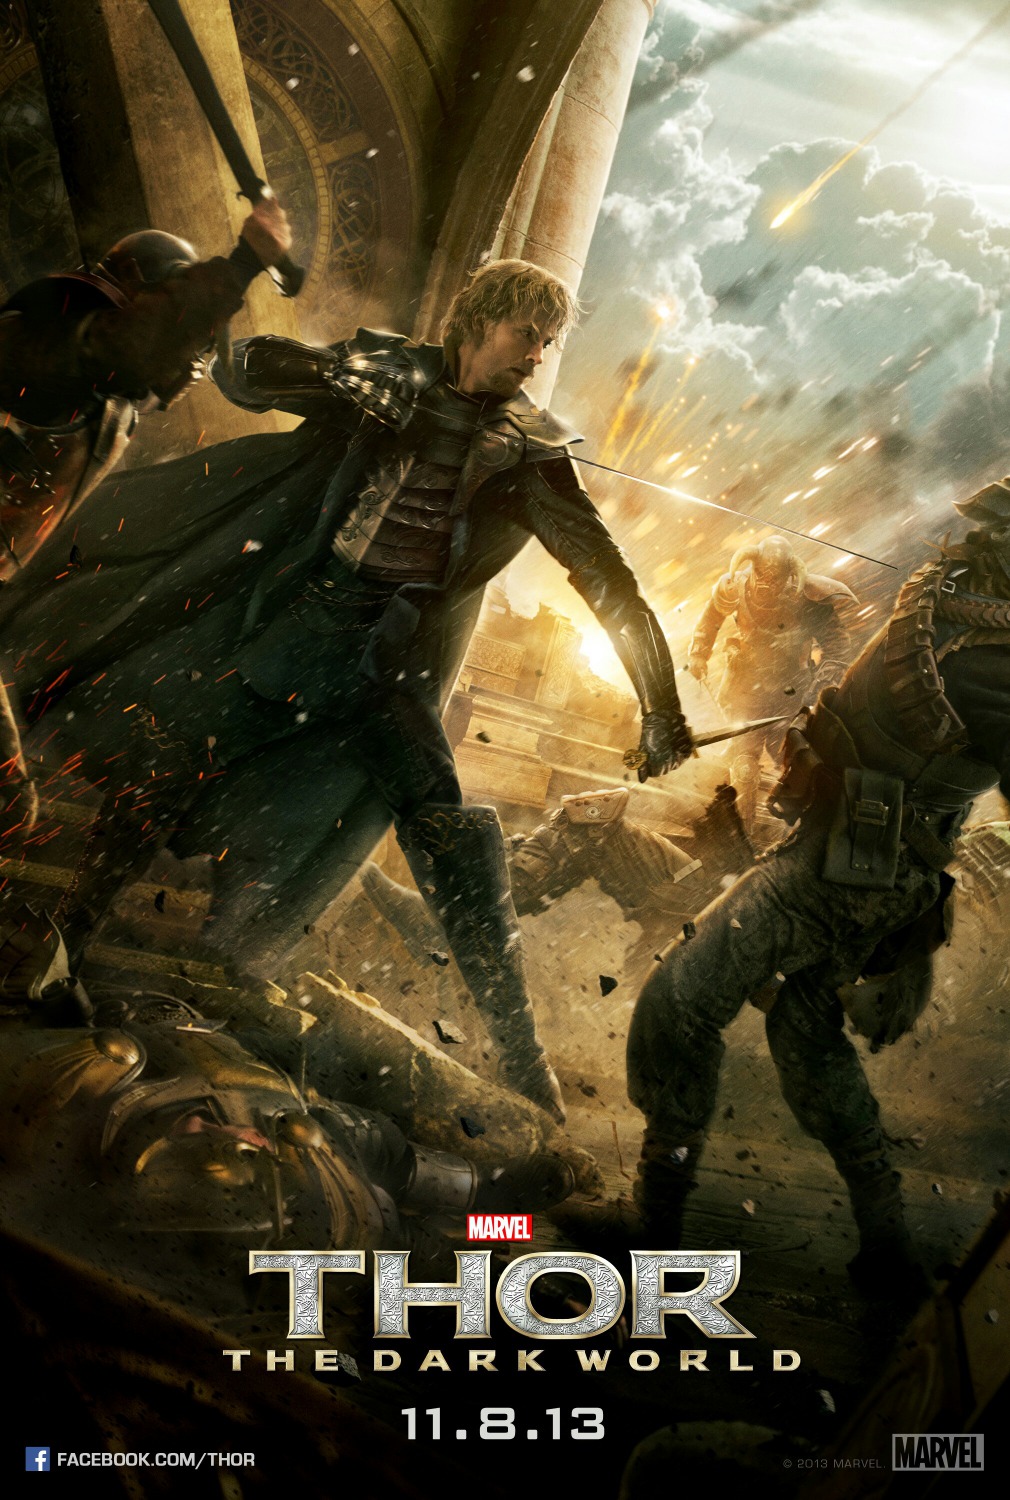 Extra Large Movie Poster Image for Thor: The Dark World (#18 of 19)